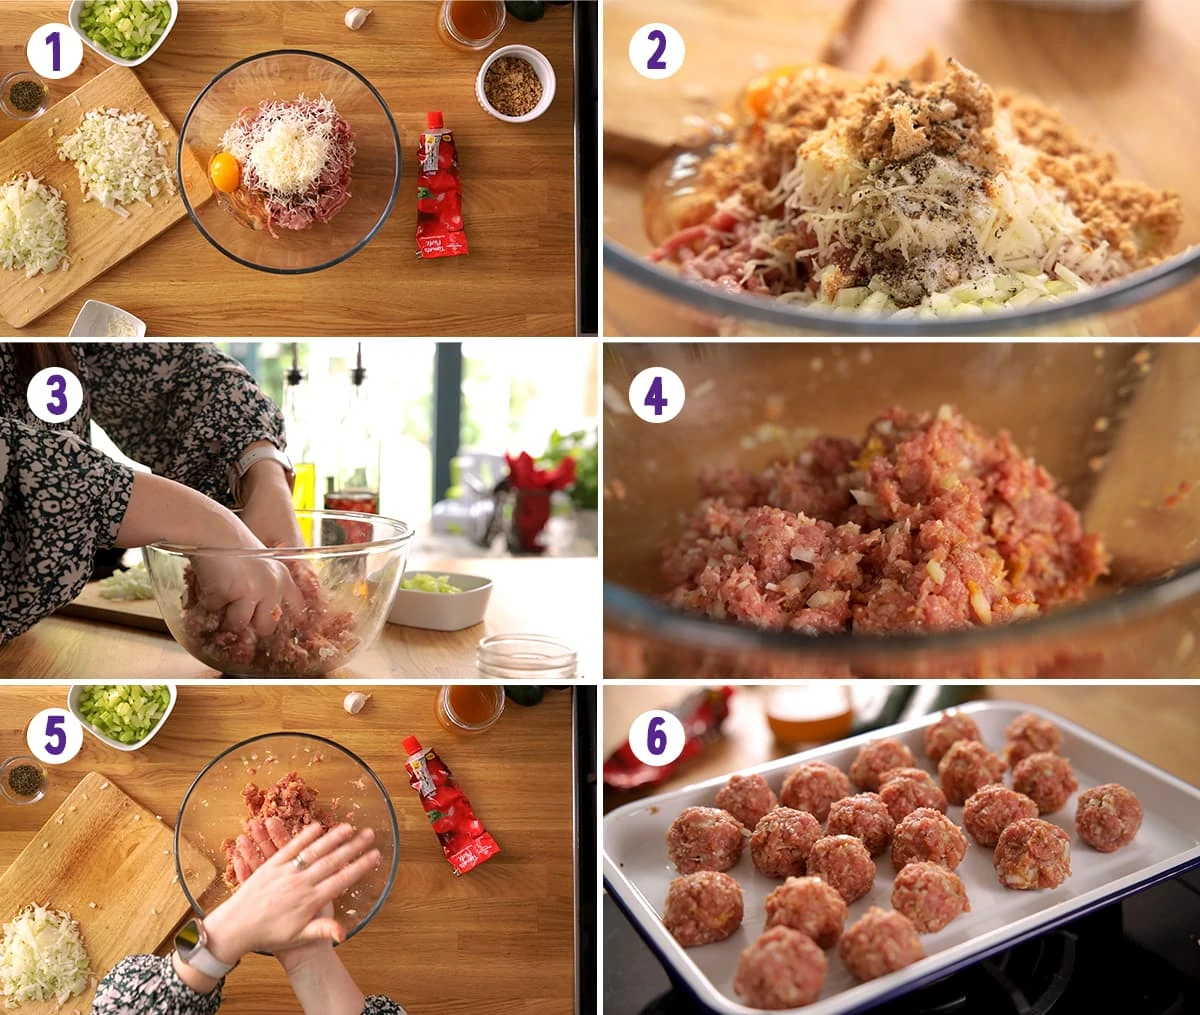 6 image collage showing initial steps for making turkey meatballs